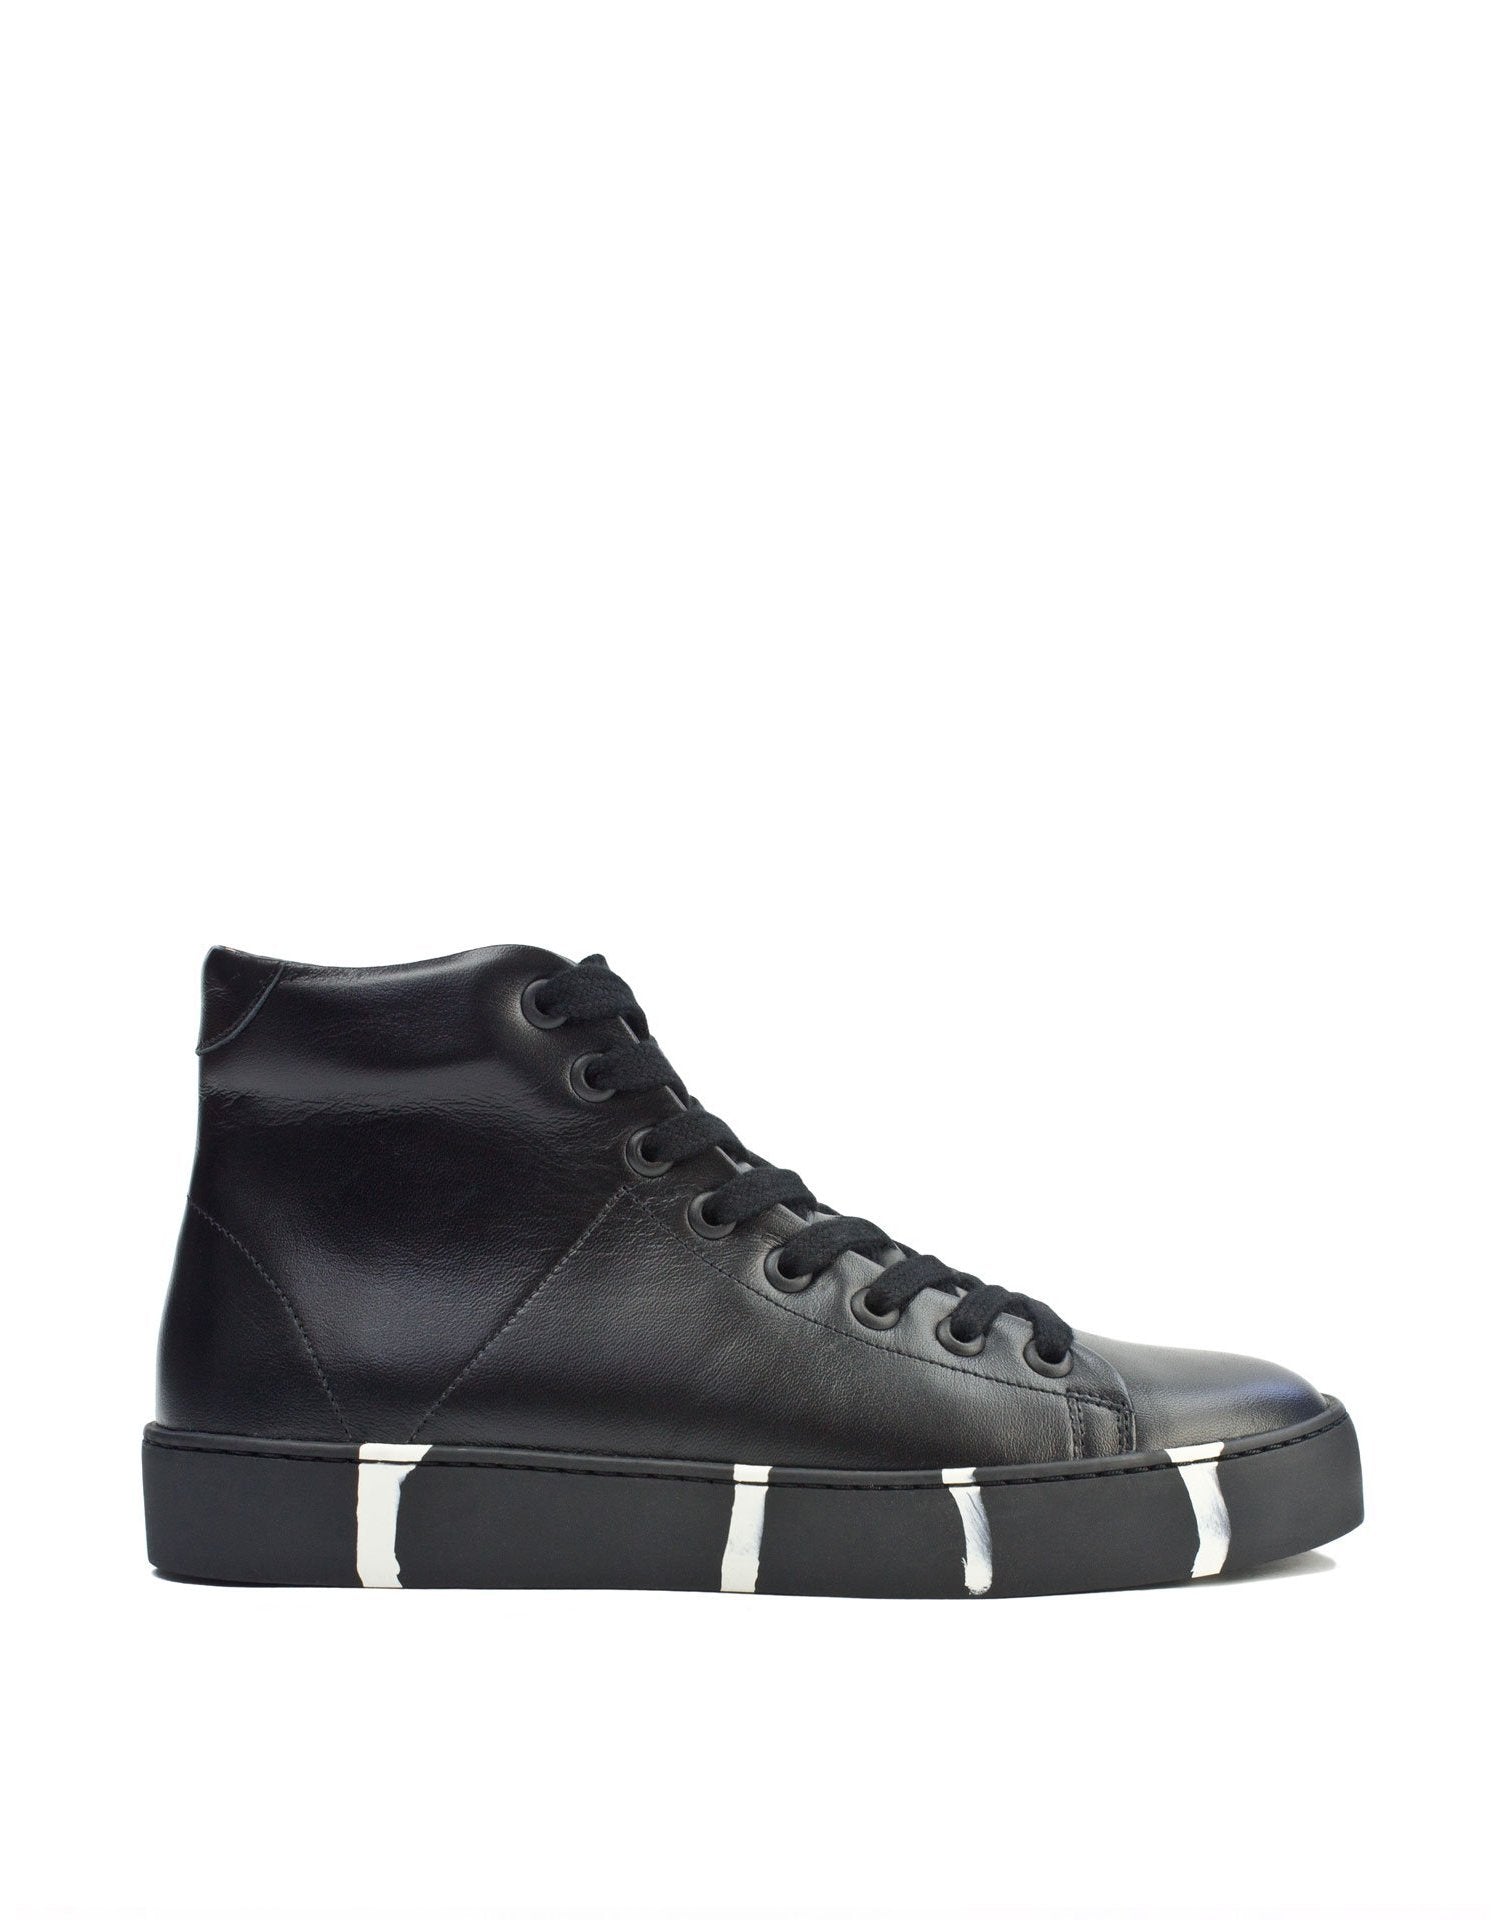 black leather high top